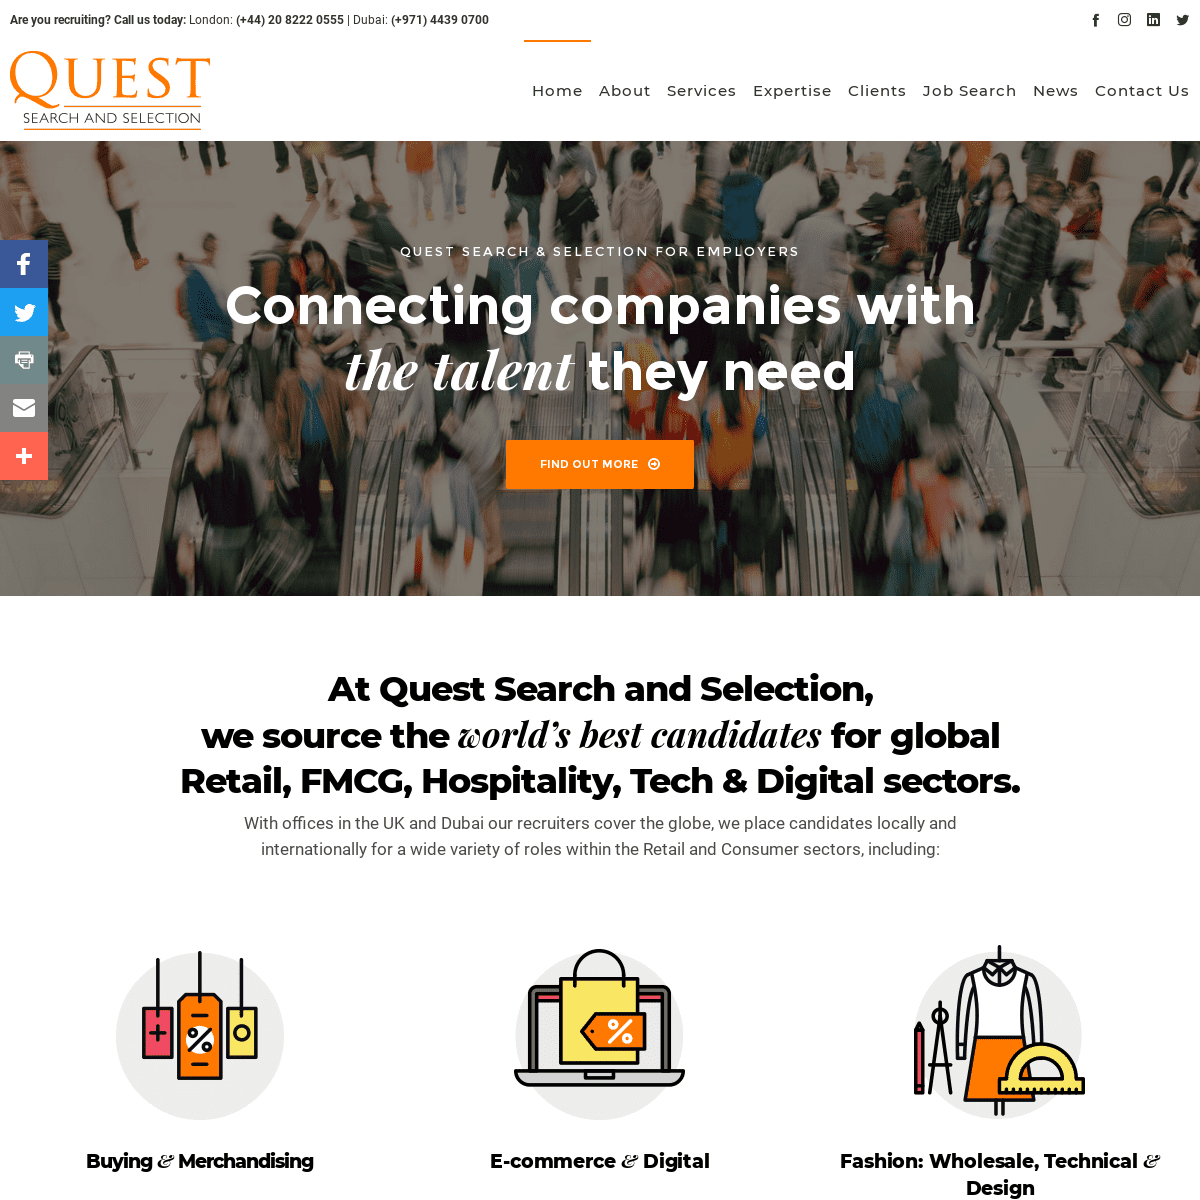 A complete backup of questsearch.co.uk